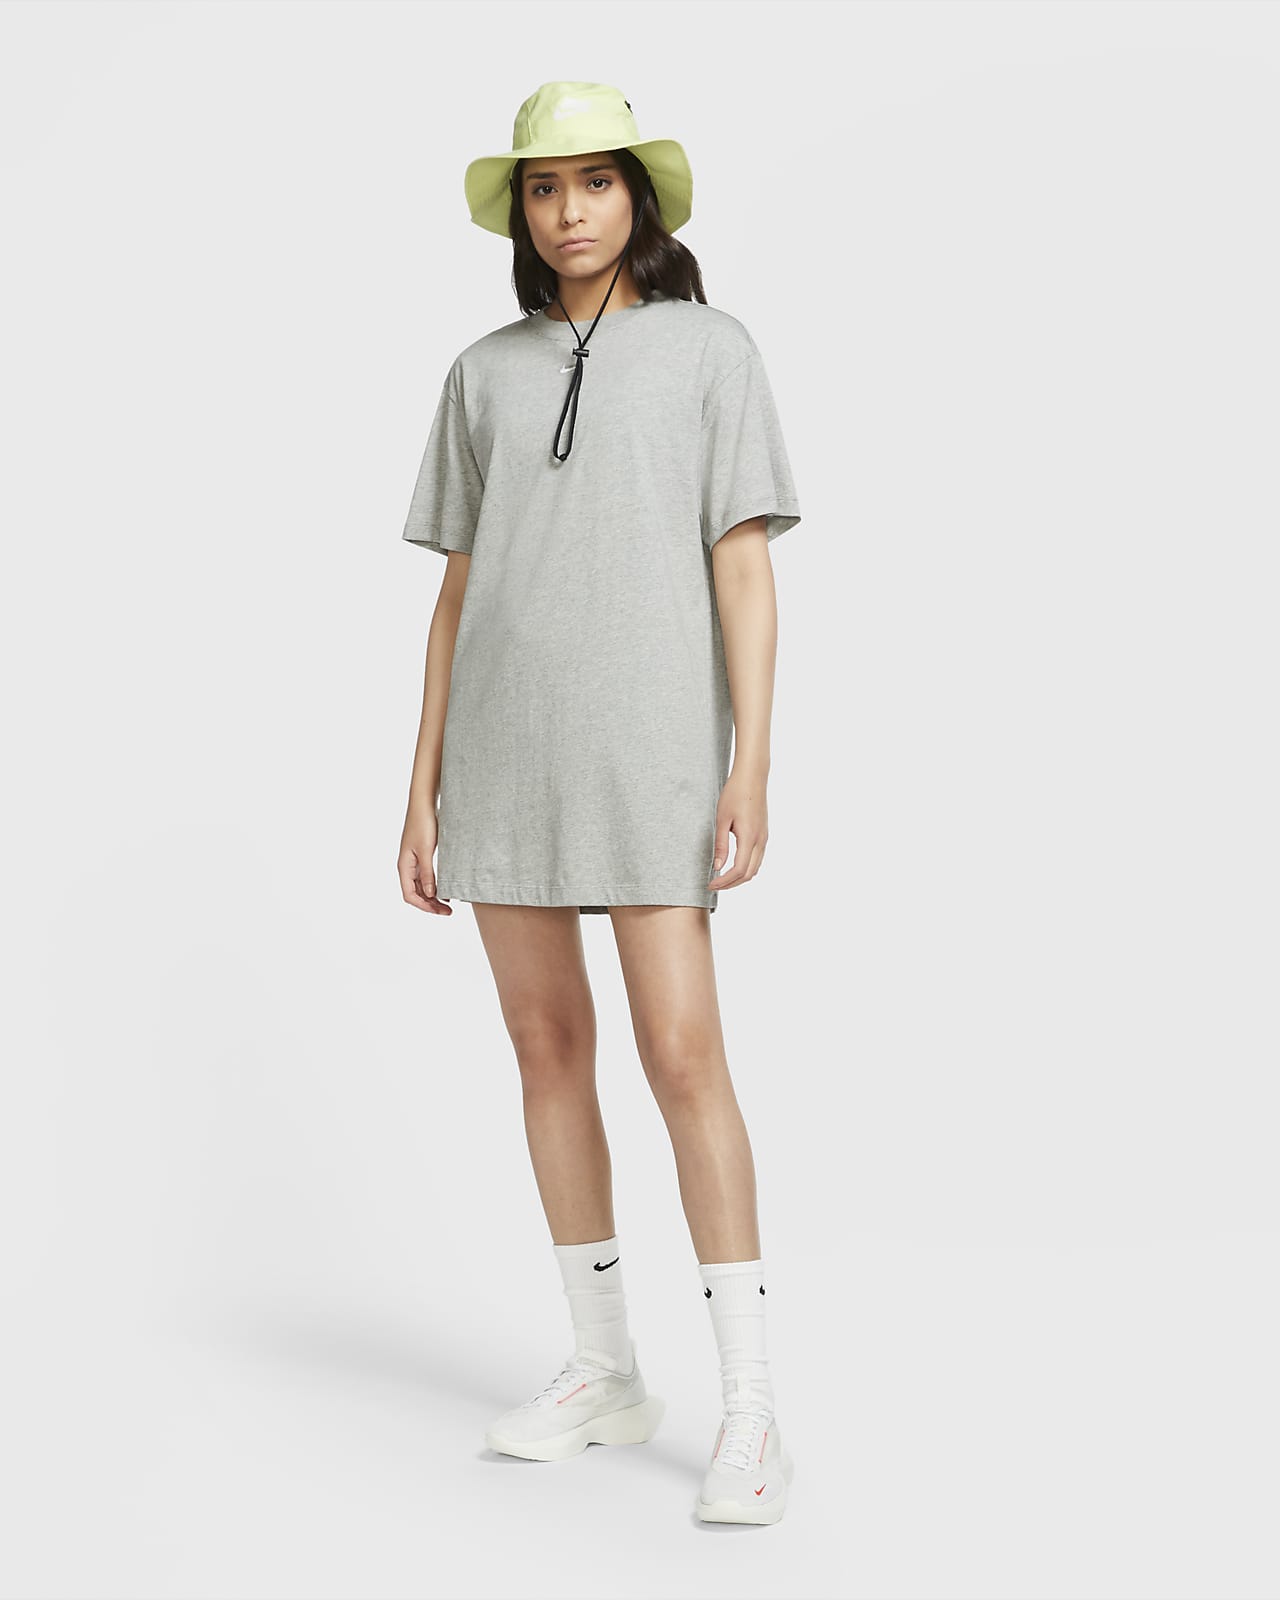 nike dresses south africa